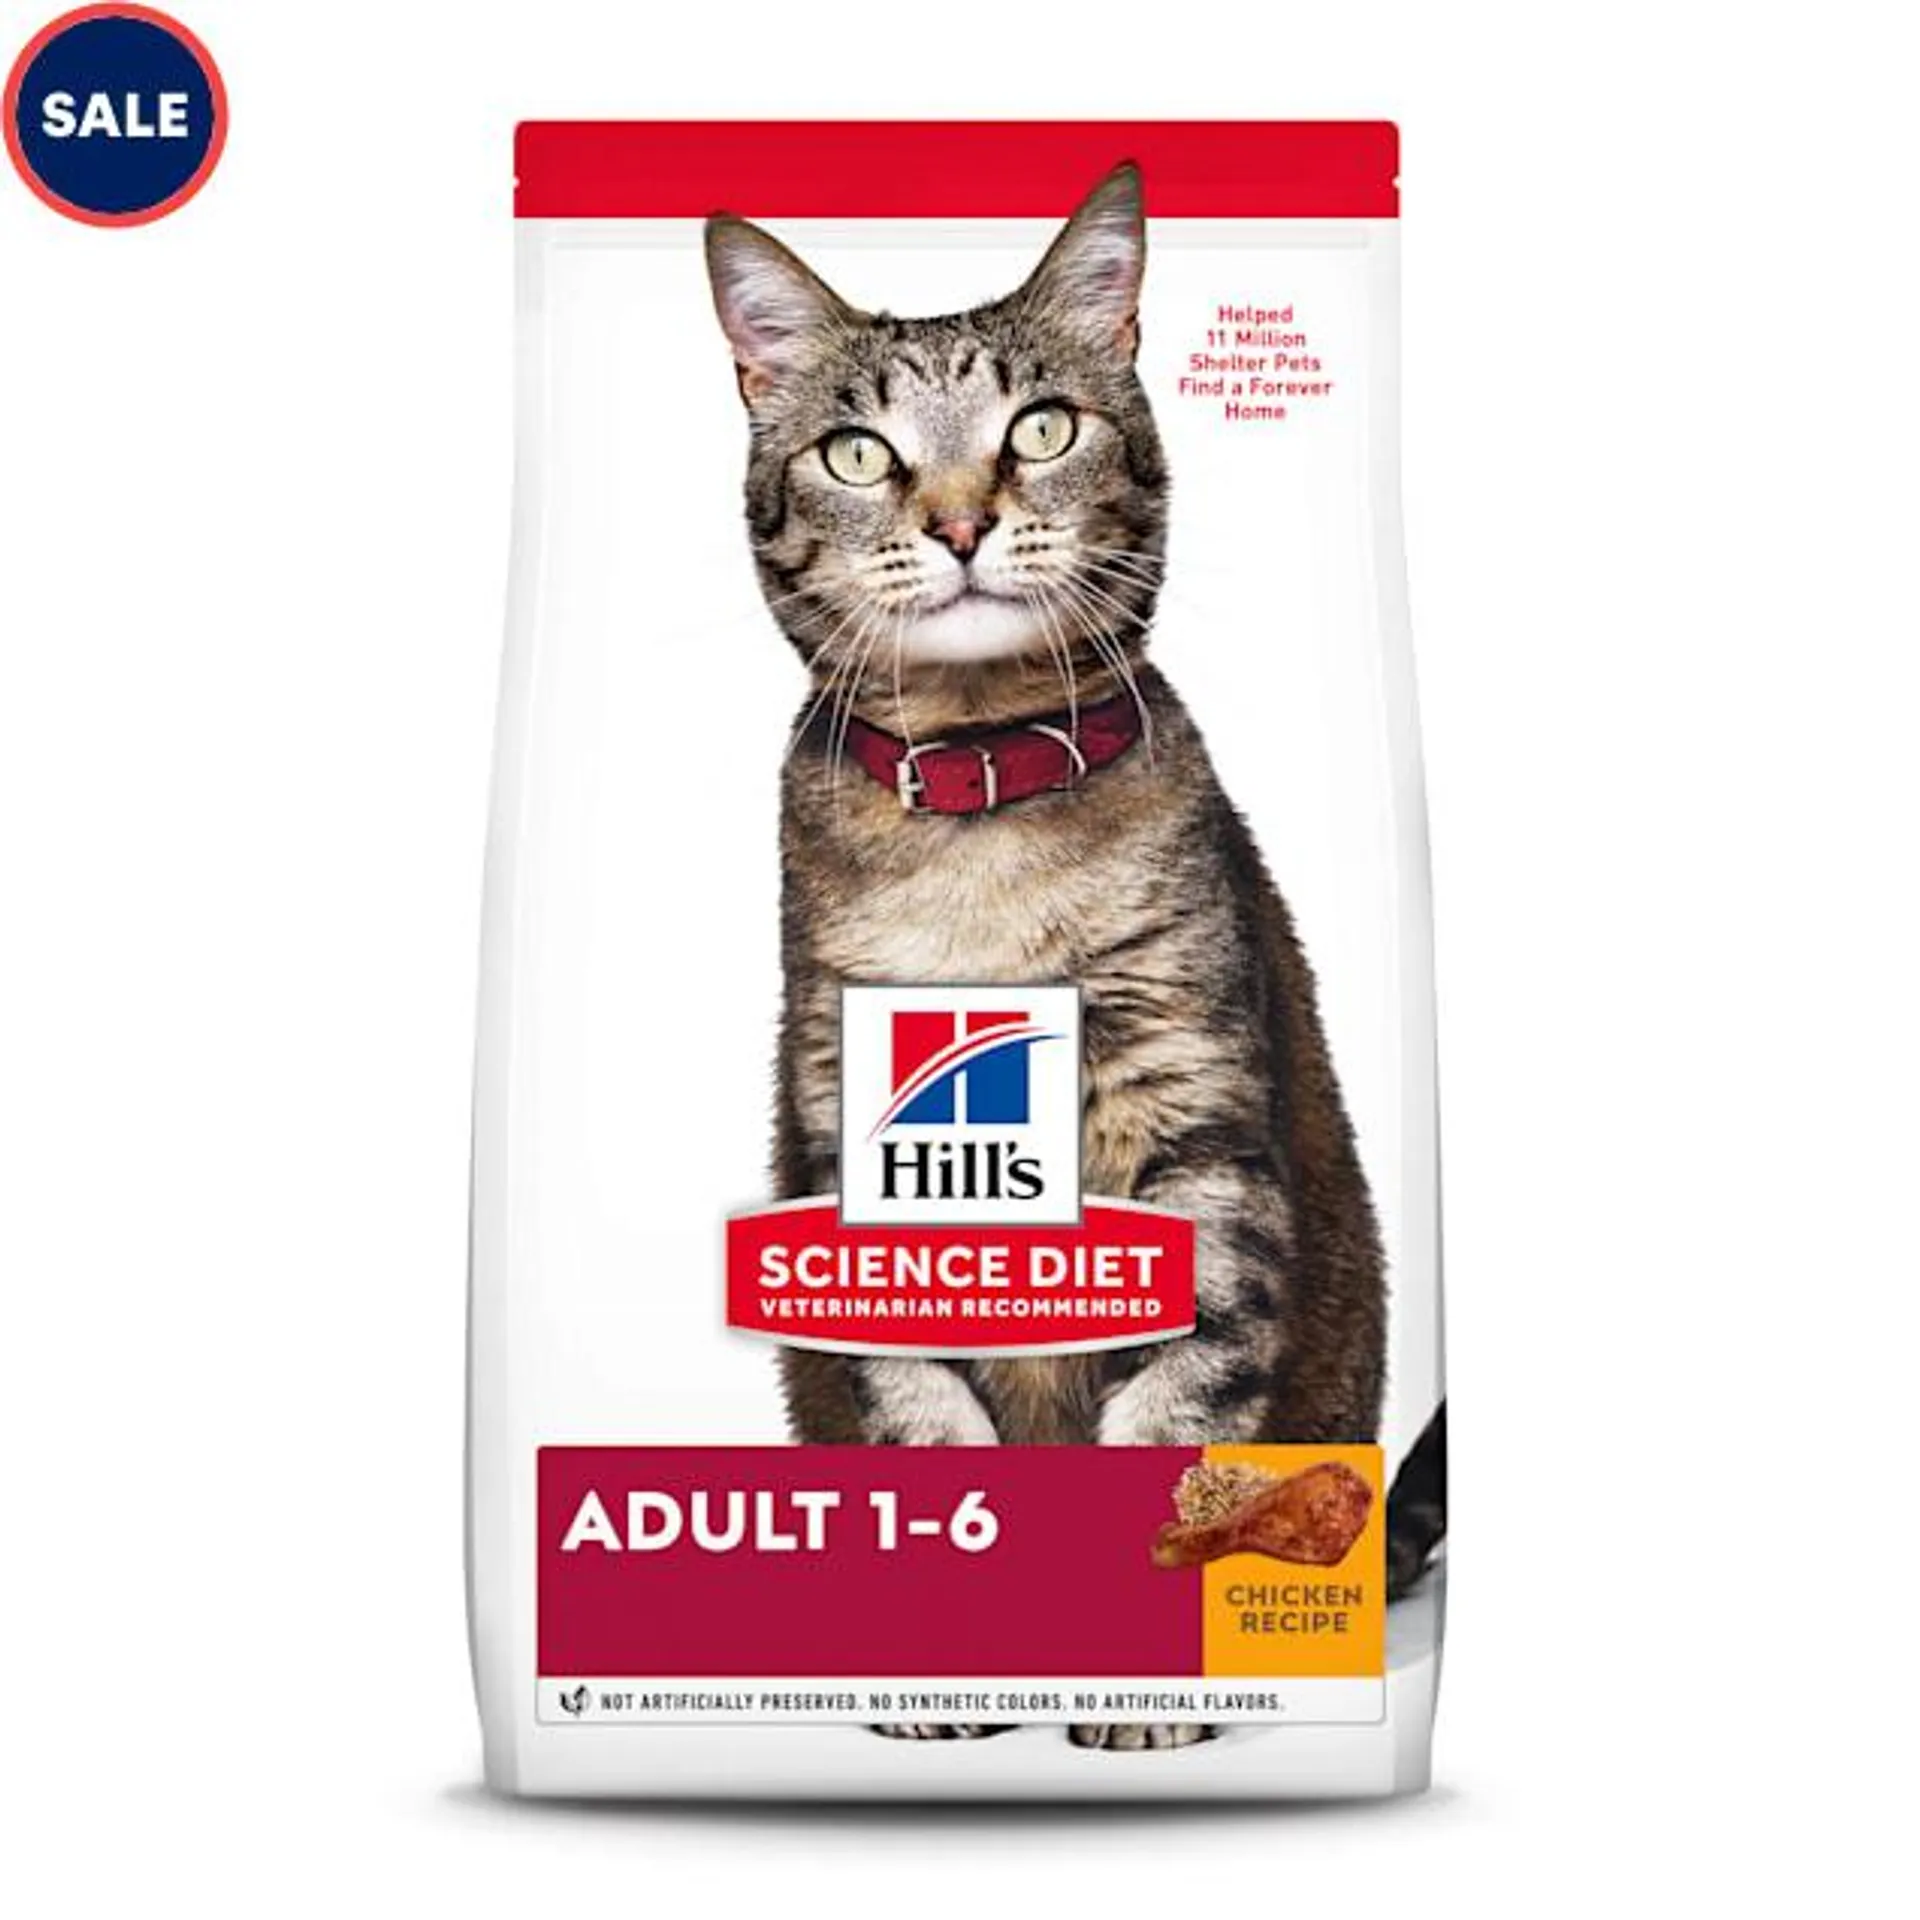 Hill's Science Diet Adult Chicken Recipe Dry Cat Food, 16 lbs.